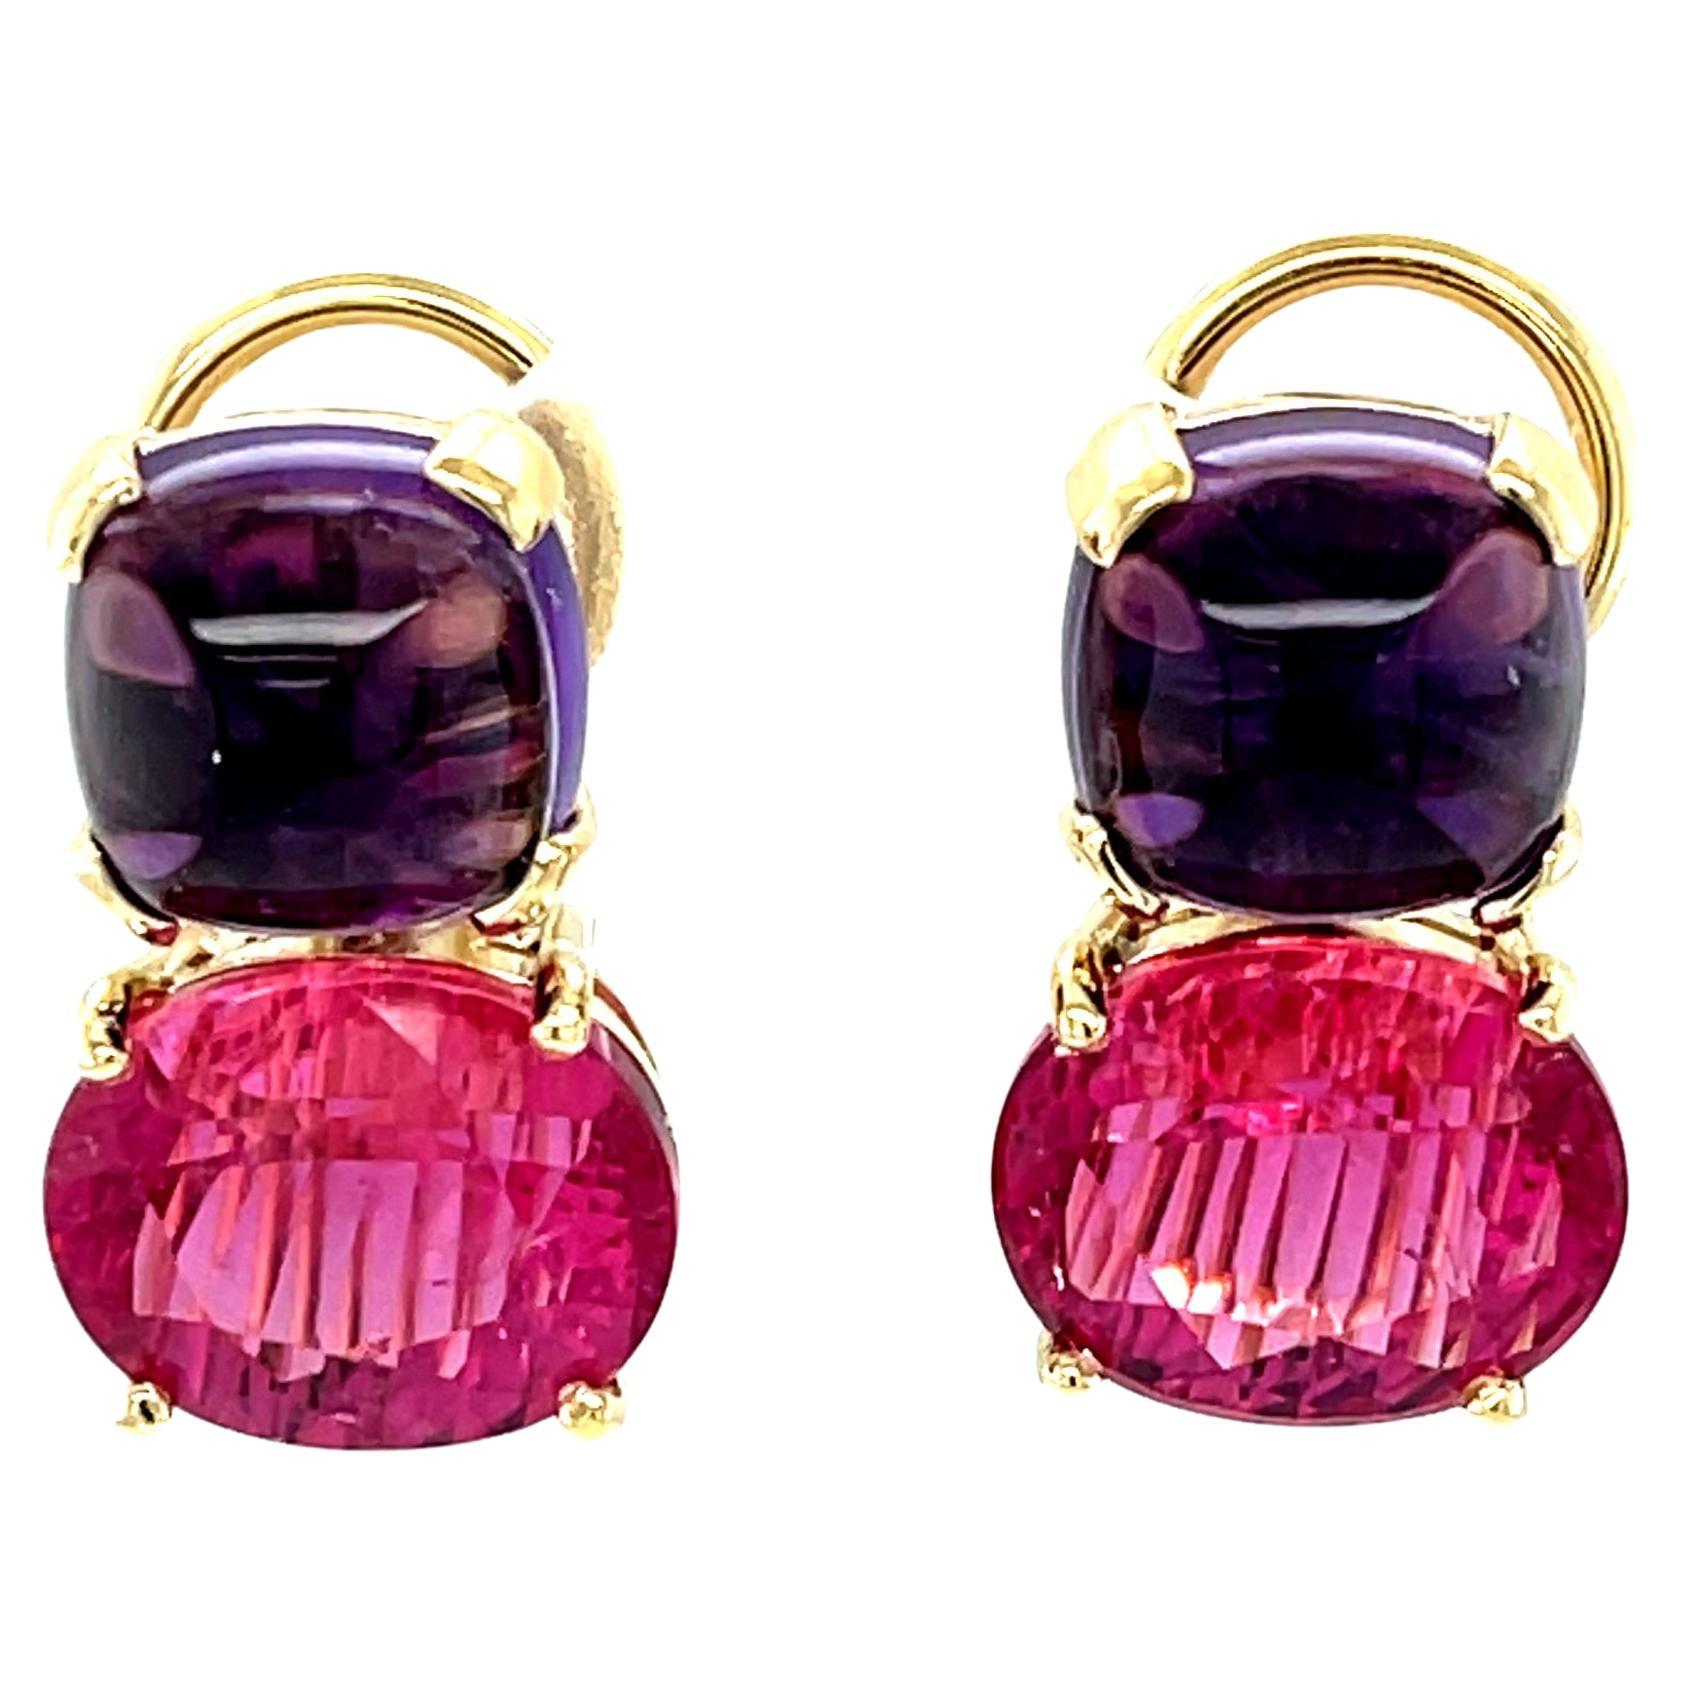 These striking gemstone earrings feature beautiful royal purple amethyst cabochons and deep purplish pink rubellite tourmaline ovals set in 18k yellow gold. The rubellite tourmalines have an unusual 